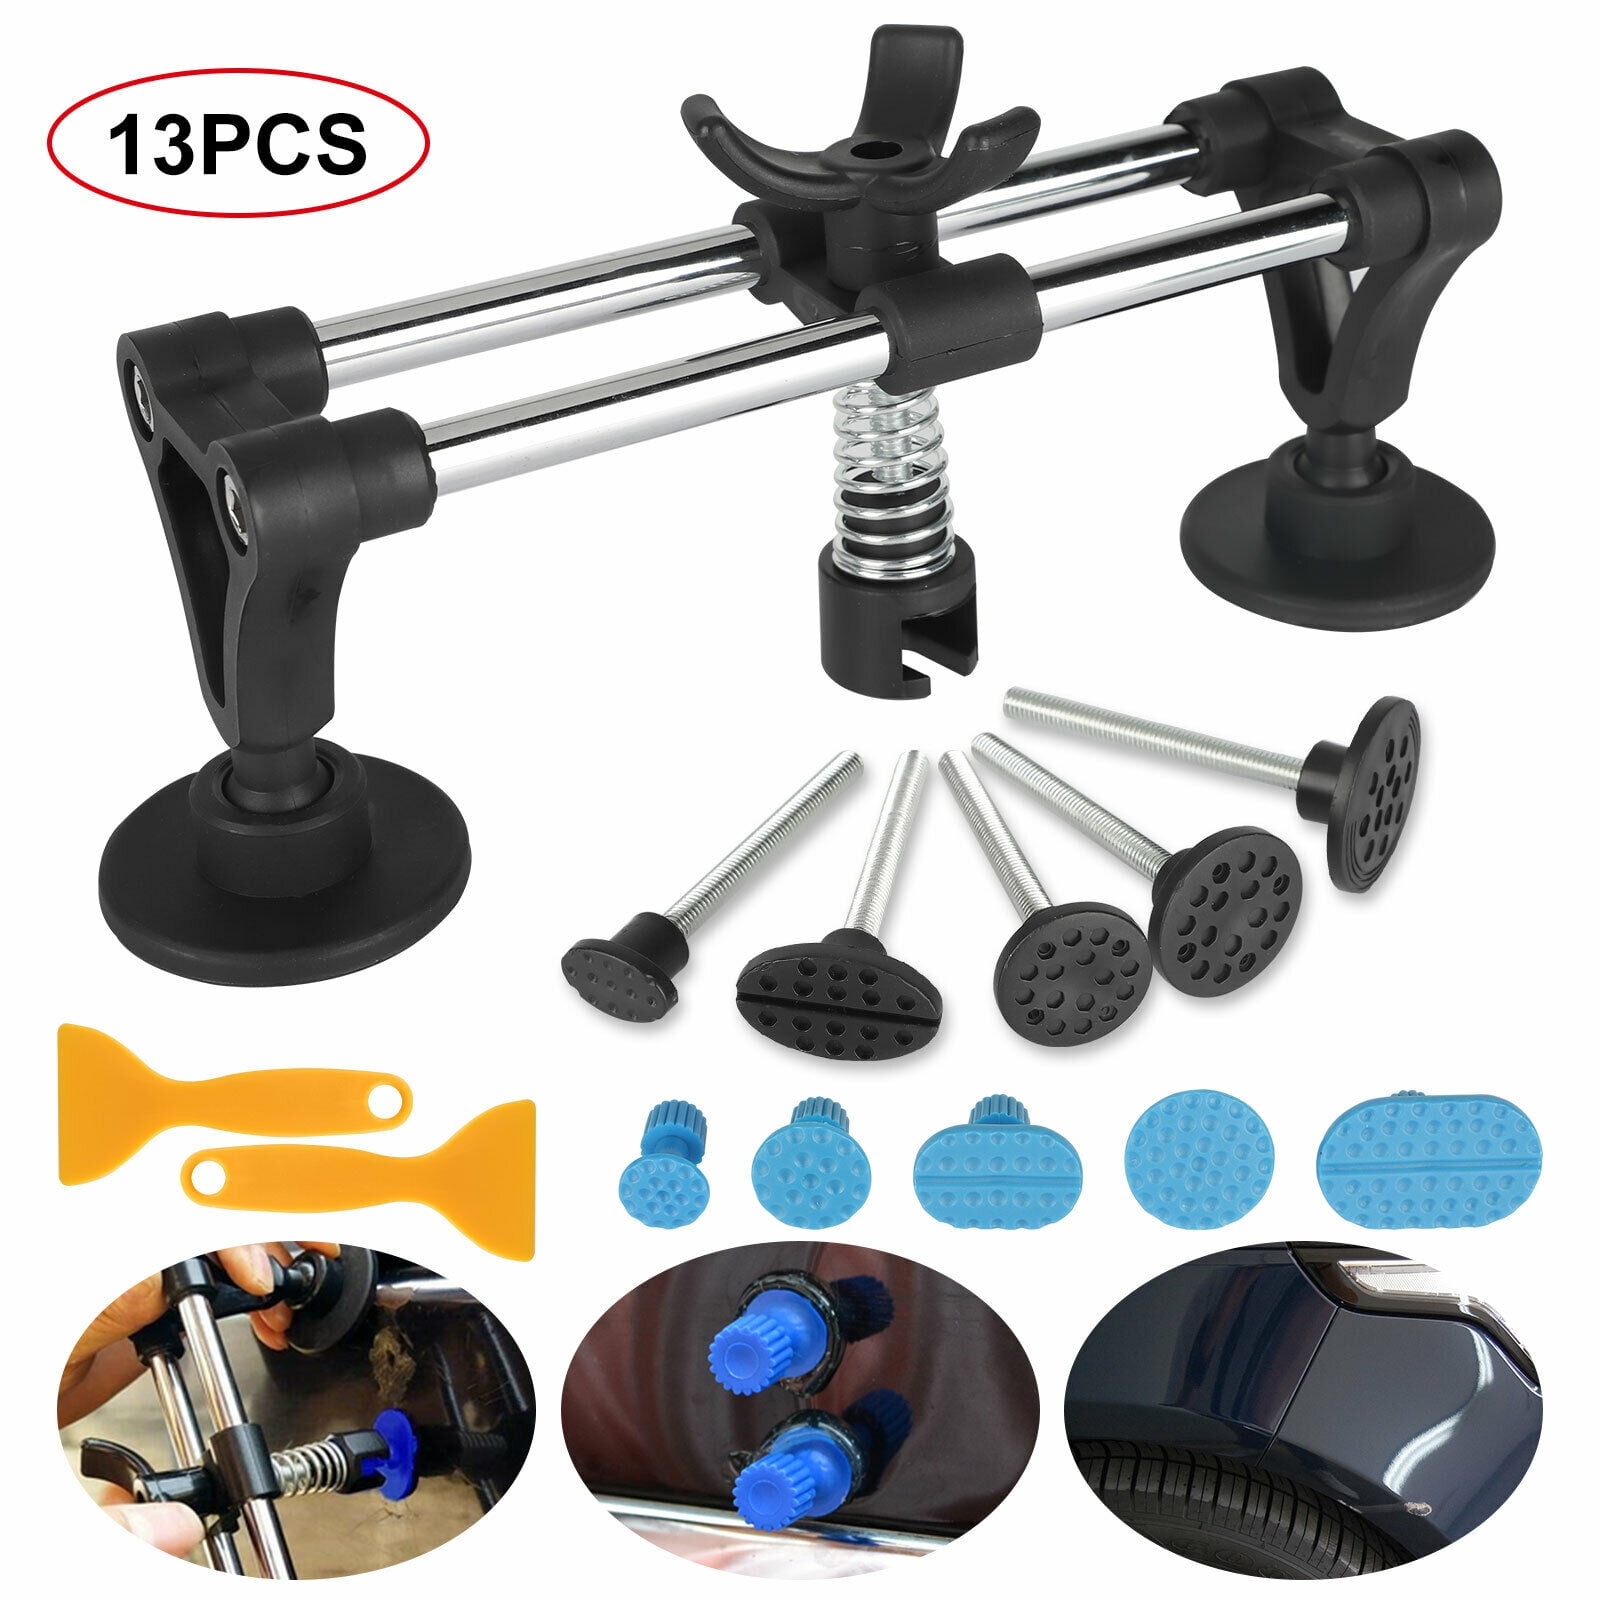 Car Auto Dent Ding Remover Repair Puller Sucker Bodywork Panel Suction Cup Tools 